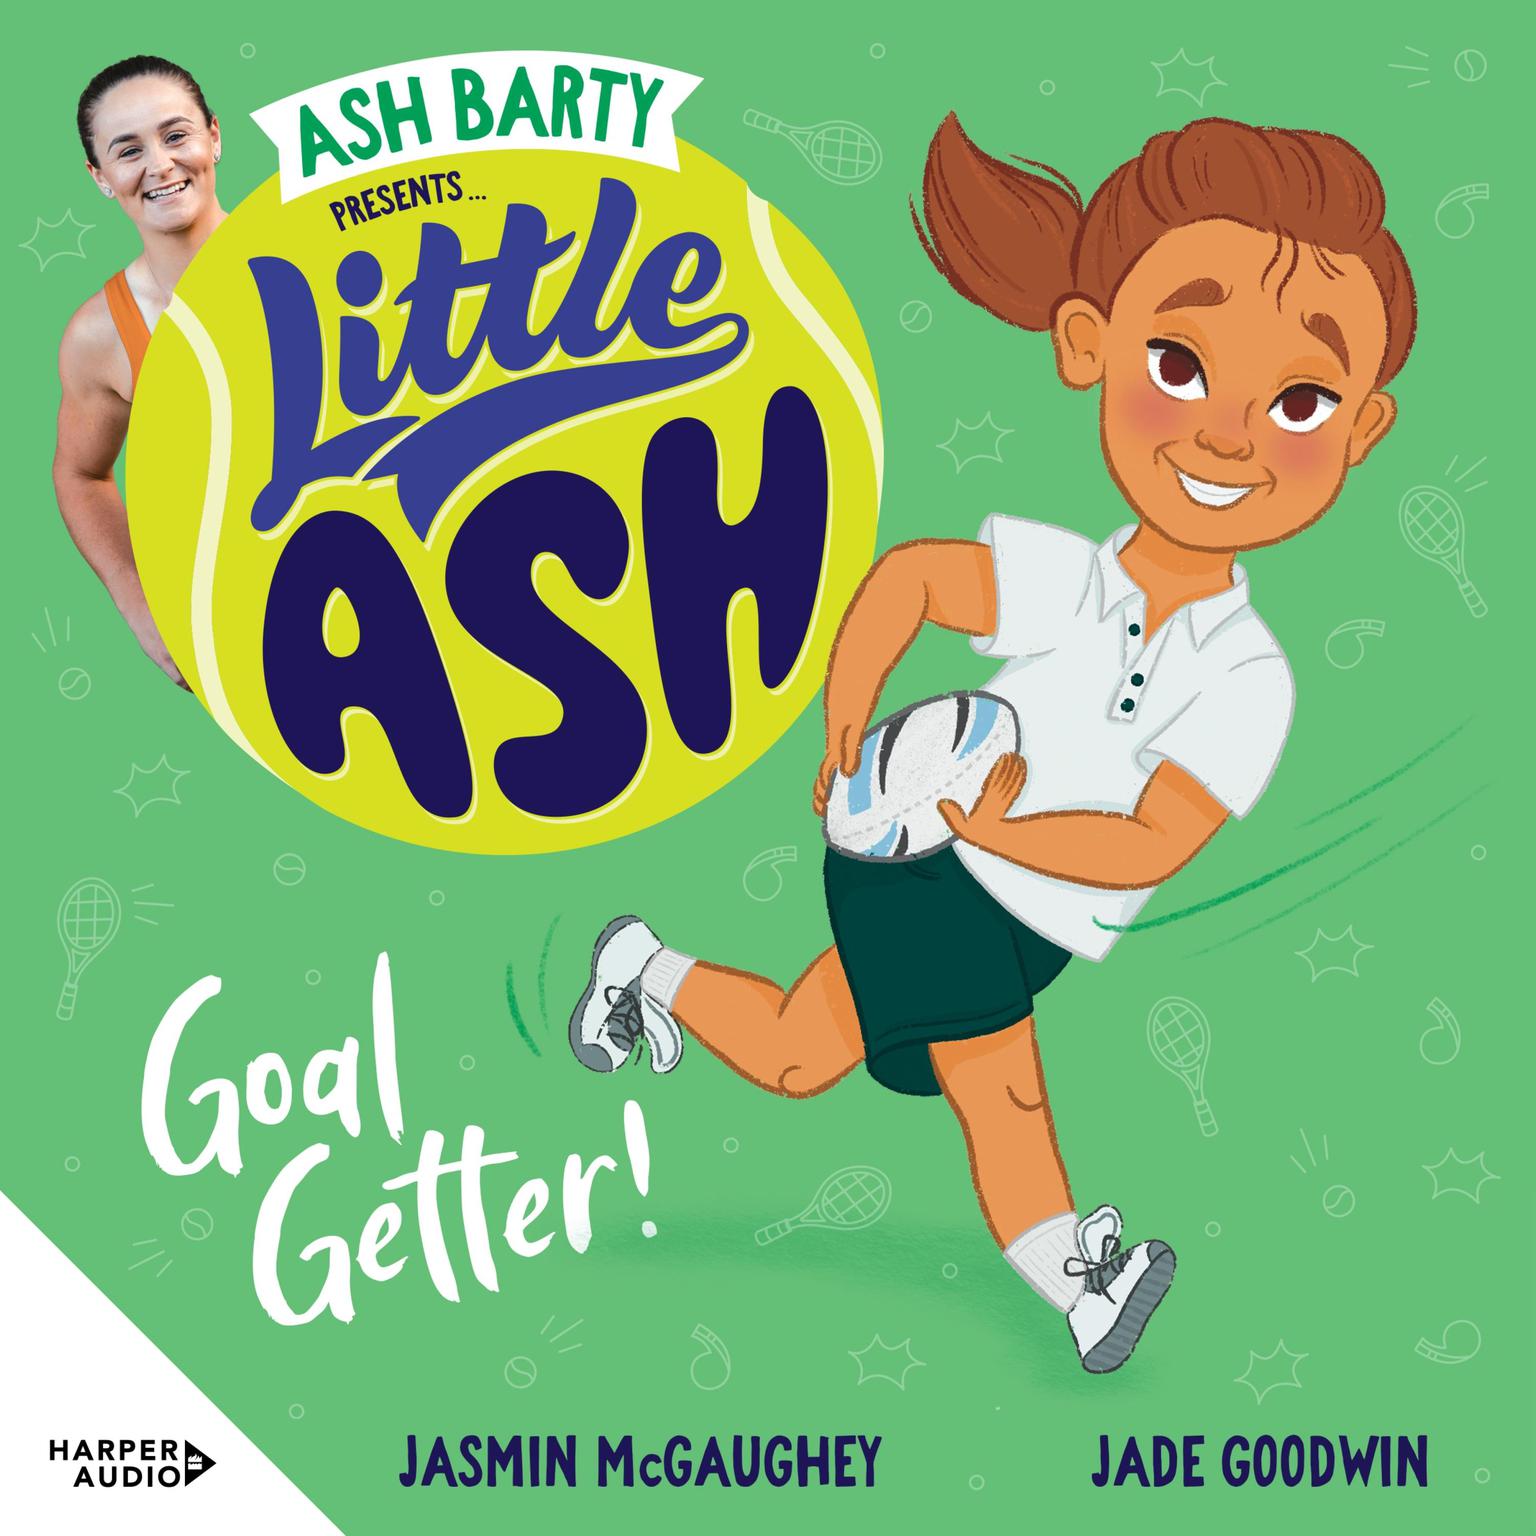 Little Ash Goal Getter! Audiobook, by Ash Barty